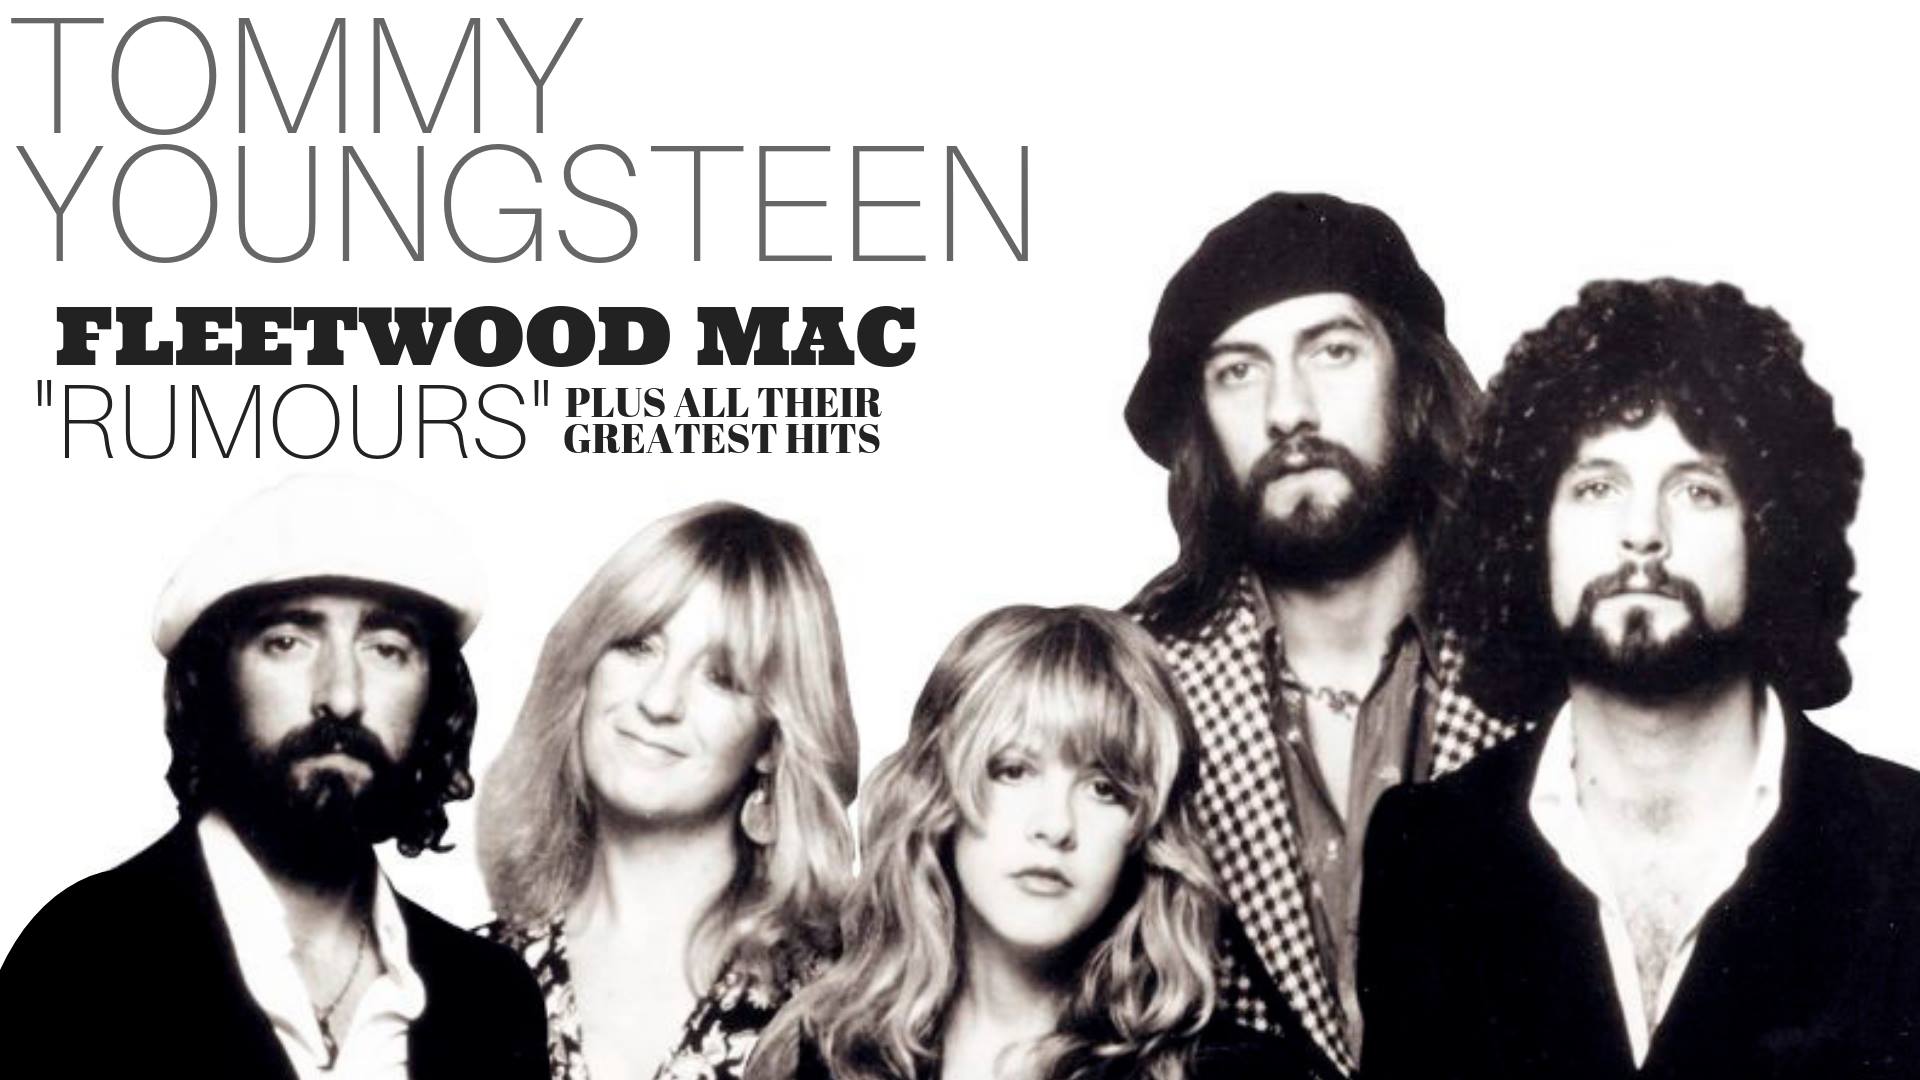 Tommy Youngsteen Poster for Fleetwood Mac Tribute